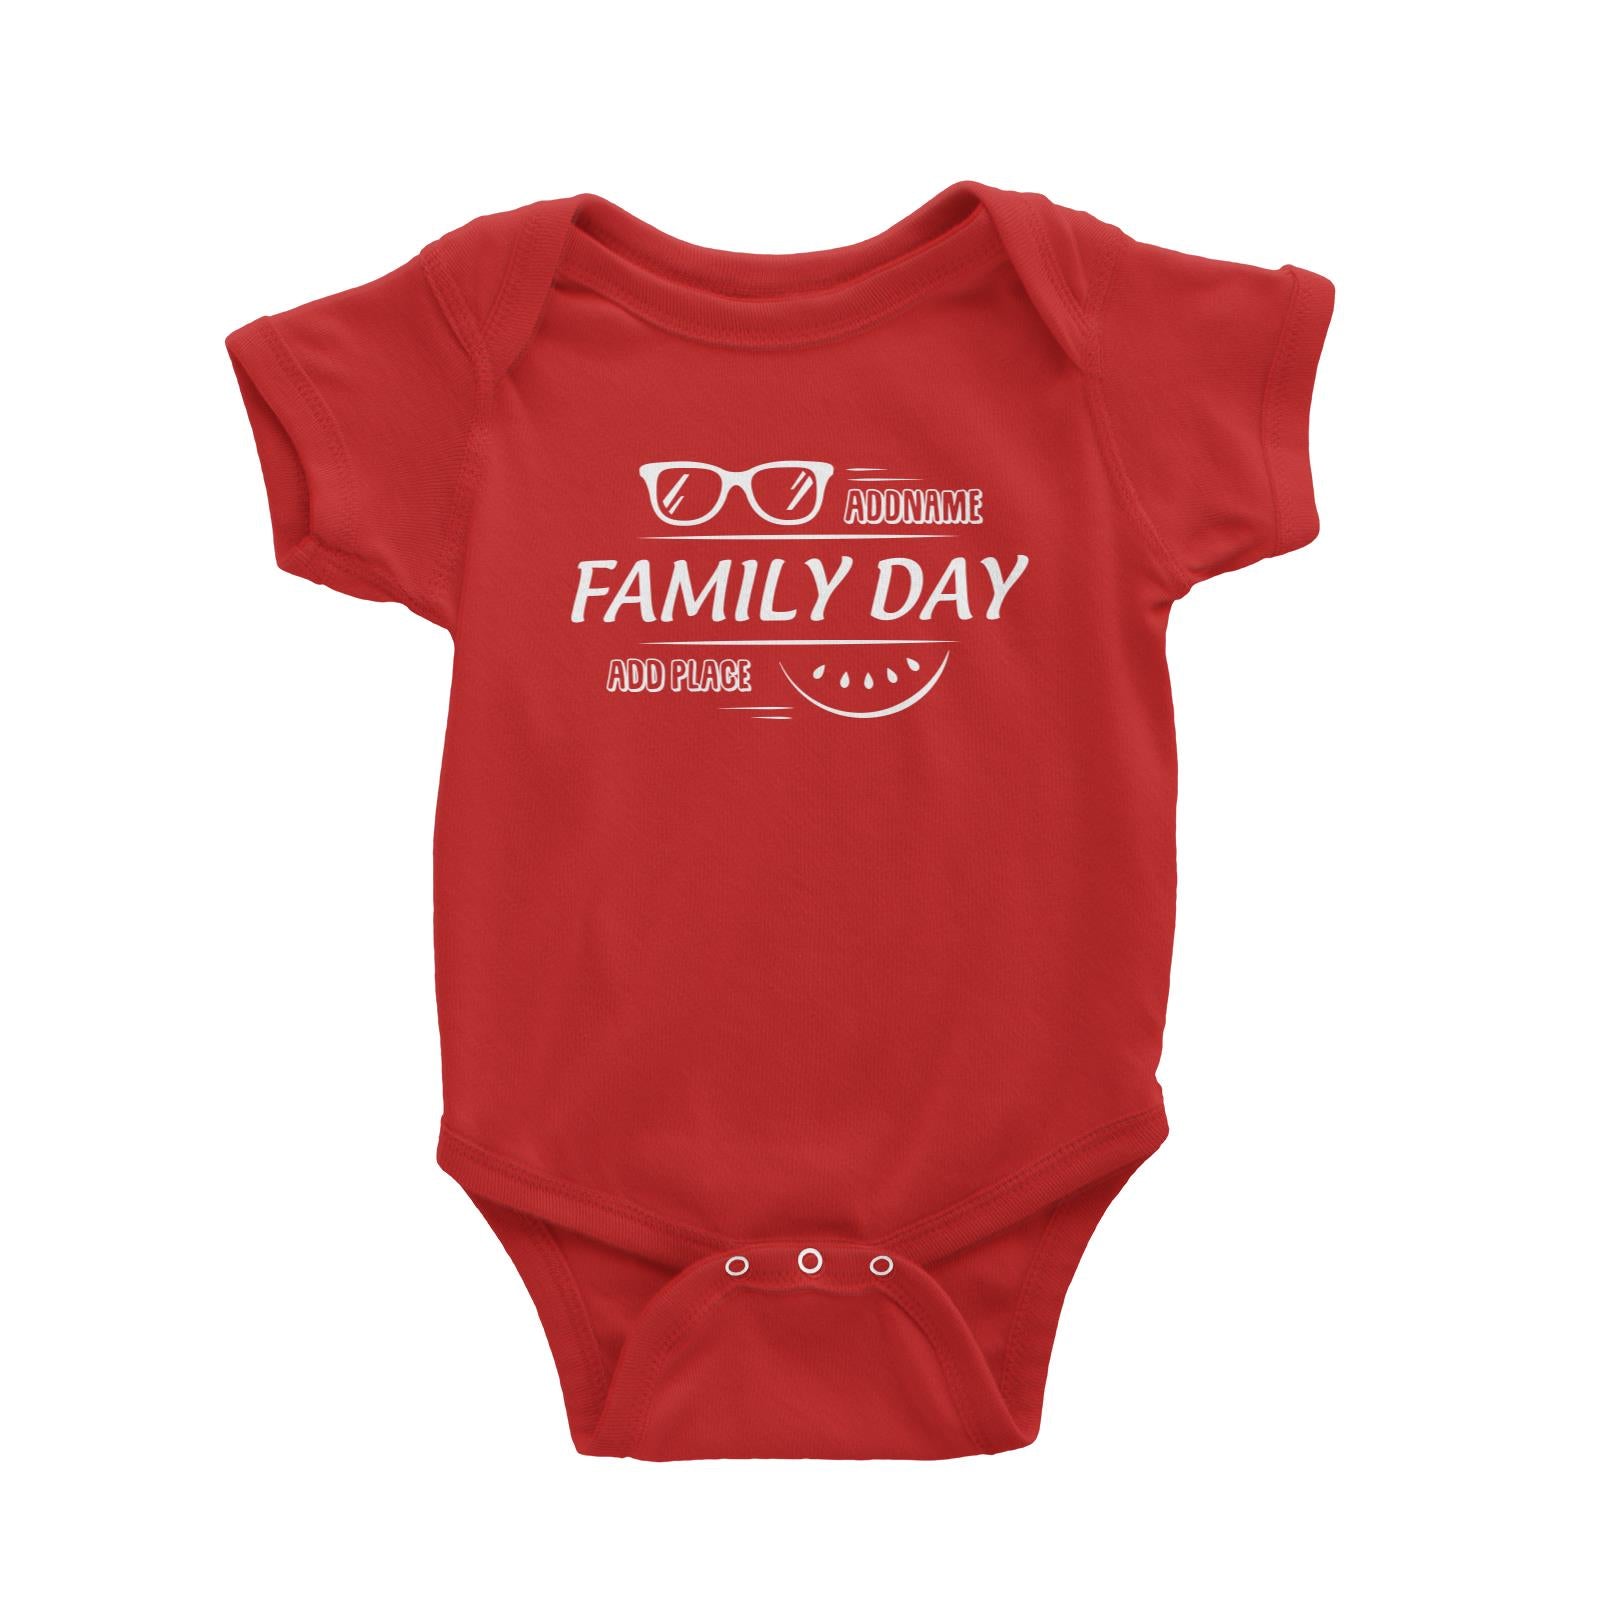 Family Day Tropical Sun Glasses Family Day Addname And Add Place Baby Romper